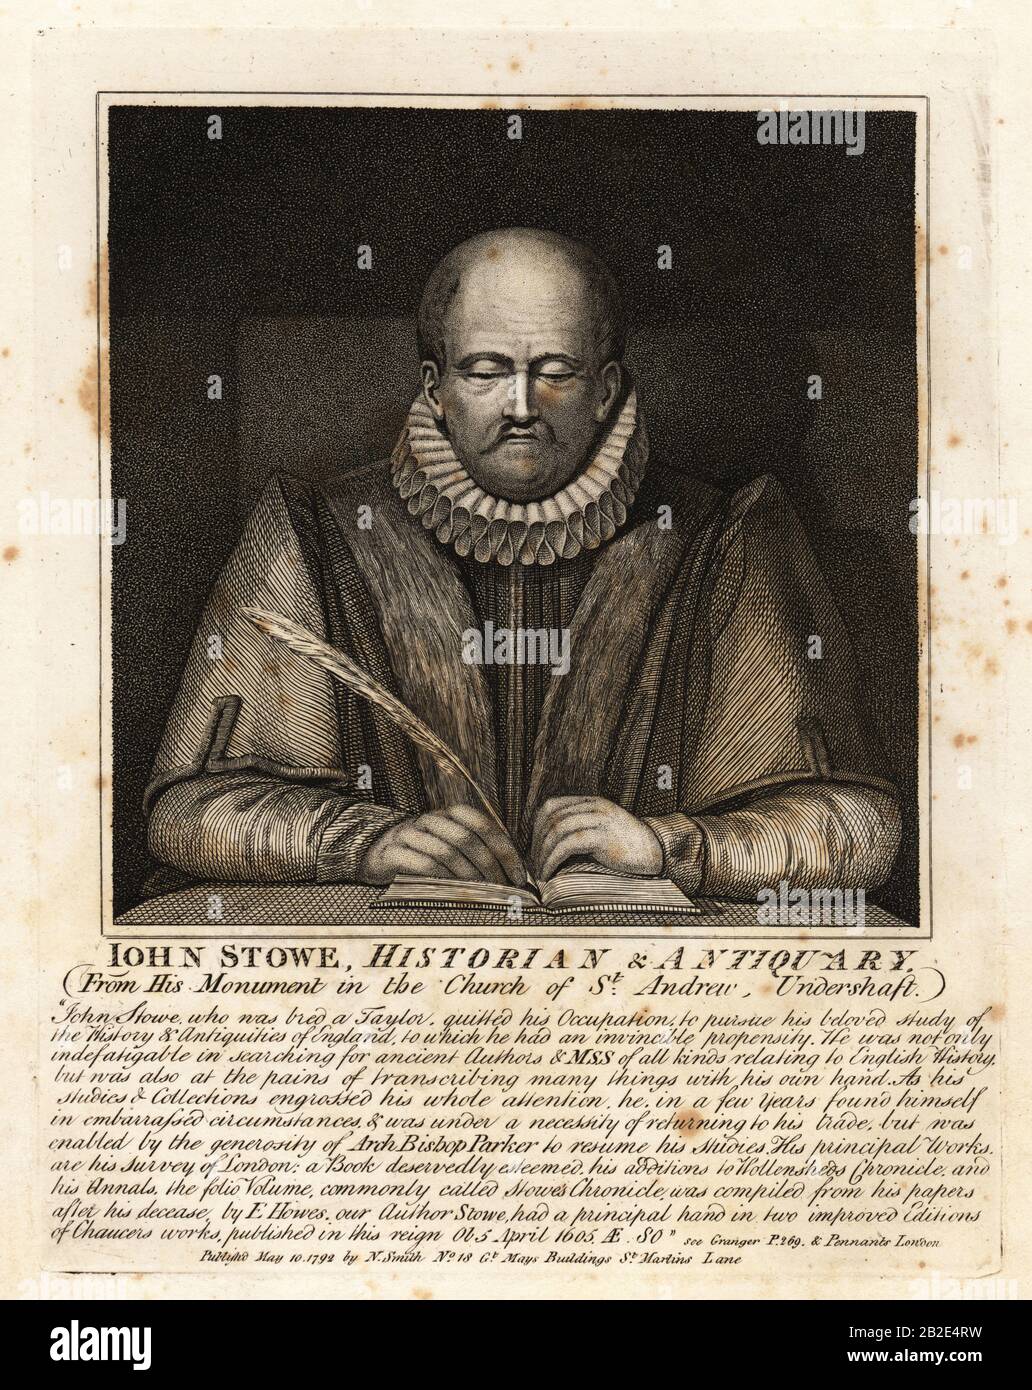 John Stowe, Historian and Antiquarian, 1525-1605, from his monument in the Church of St. Andrew Undershaft. Depicted in an Elizabethan ruff holding a quill pen. Copperplate engraving by John Thomas Smith after original drawings by members of the Society of Antiquaries from his J.T. Smith’s Antiquities of London and its Environs, J. Sewell, R. Folder, J. Simco, London, 1792. Stock Photo